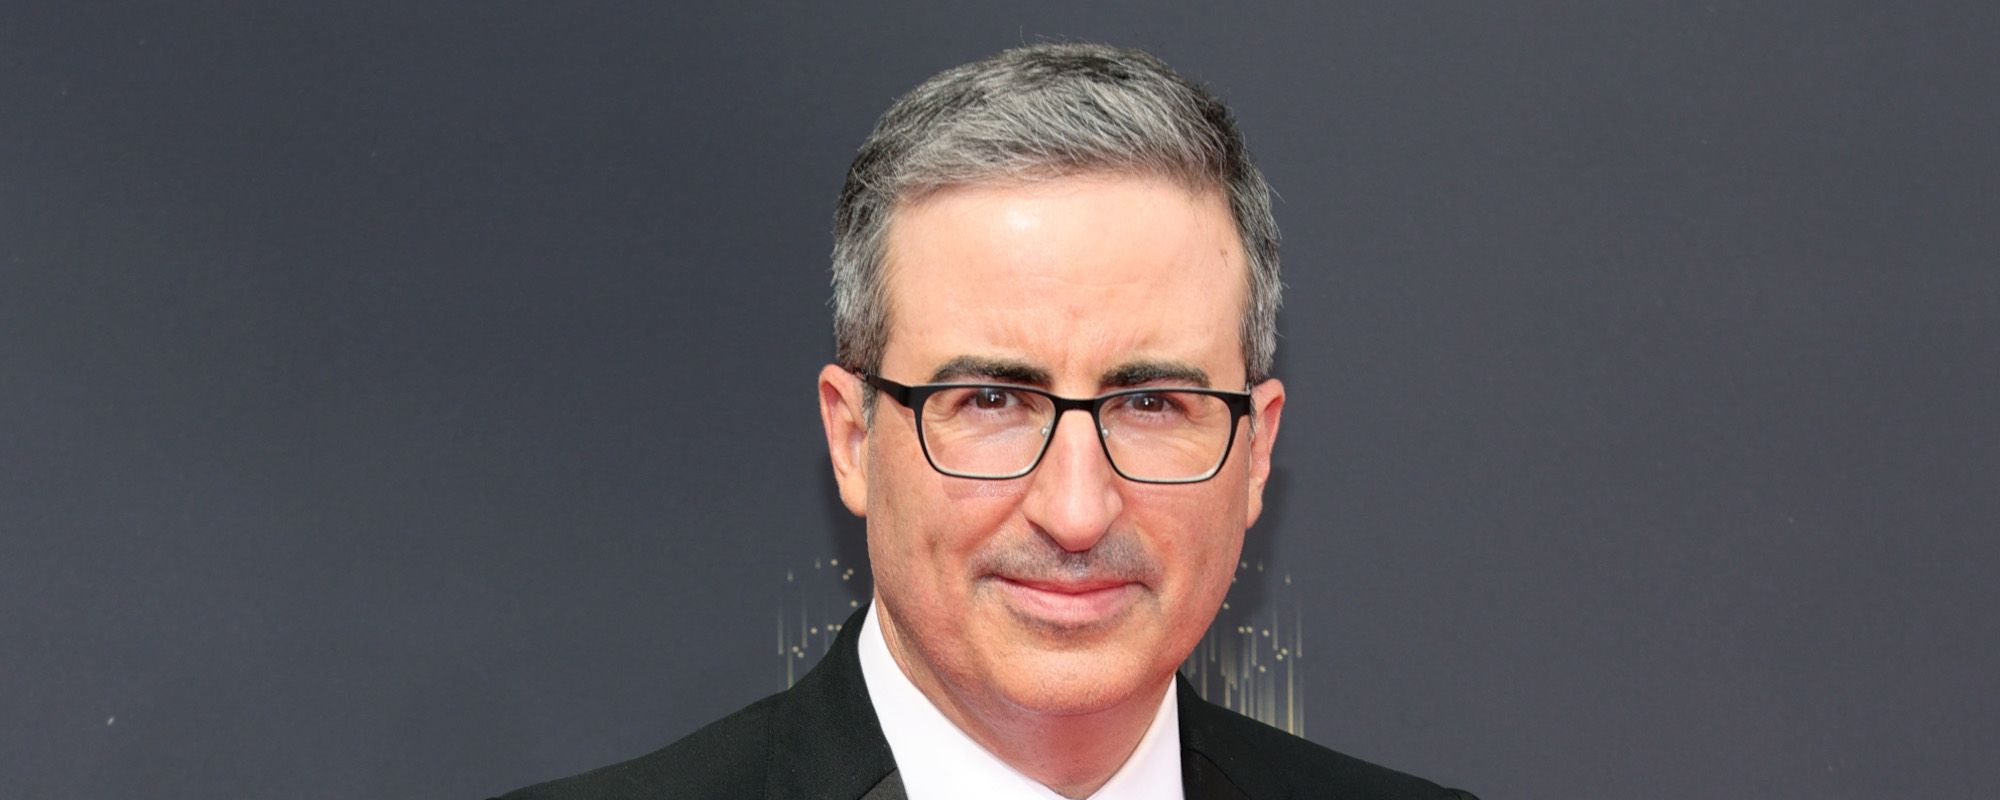 HBO’s John Oliver Takes Aim at Ticketmaster